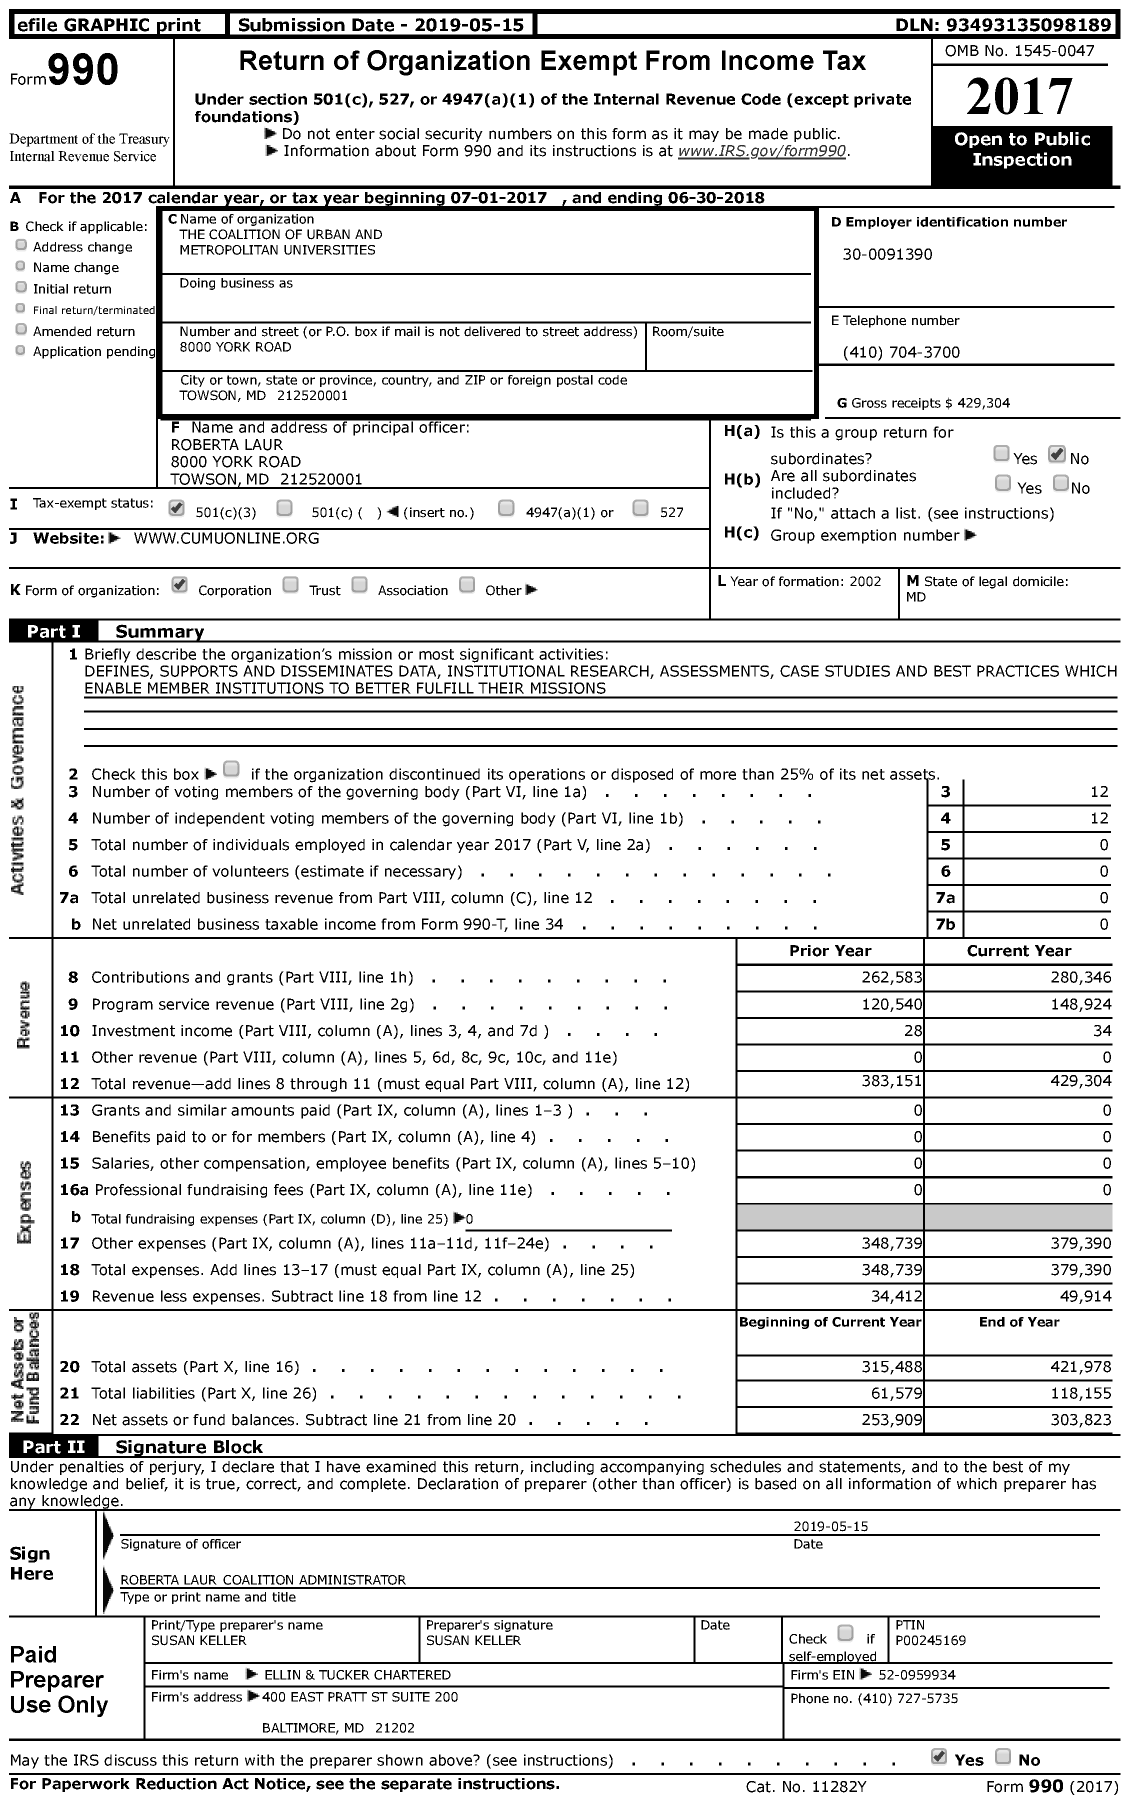 Image of first page of 2017 Form 990 for The Coalition of Urban and Metropolitan Universities